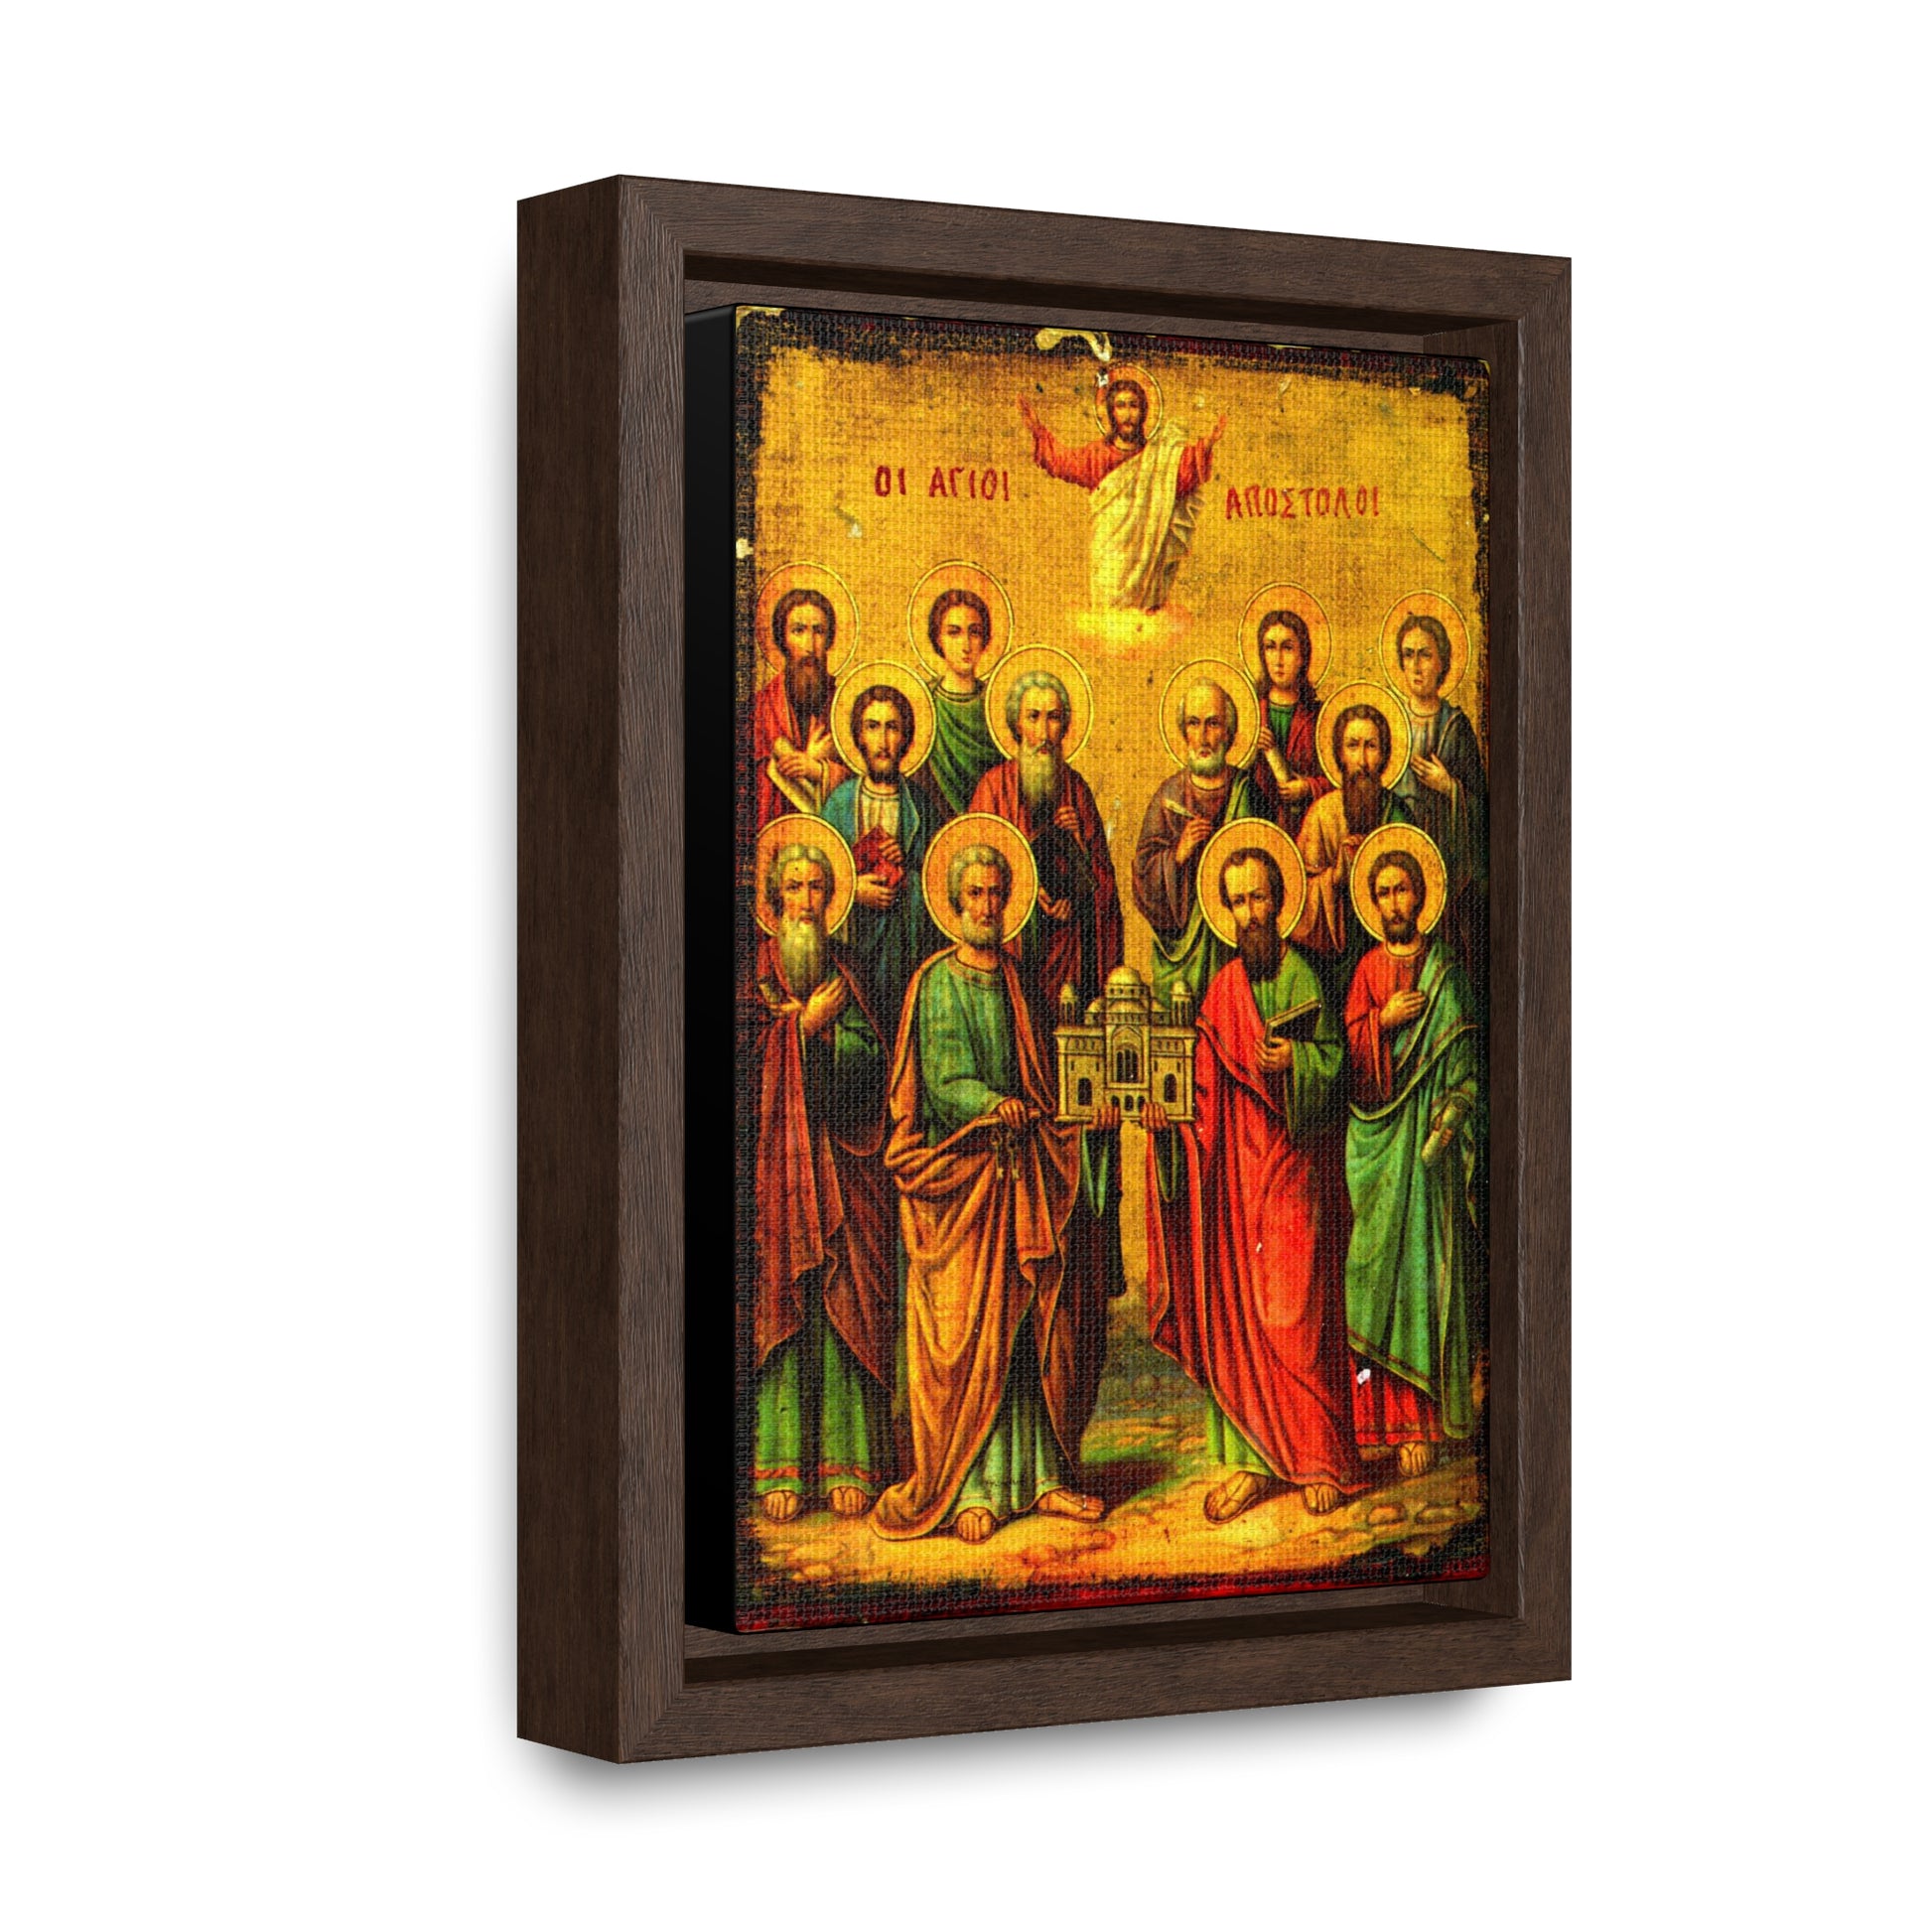 Synaxis of the Apostles Greek Icon - Framed Gallery Canvas Wrap - Sanctus Art Gallery